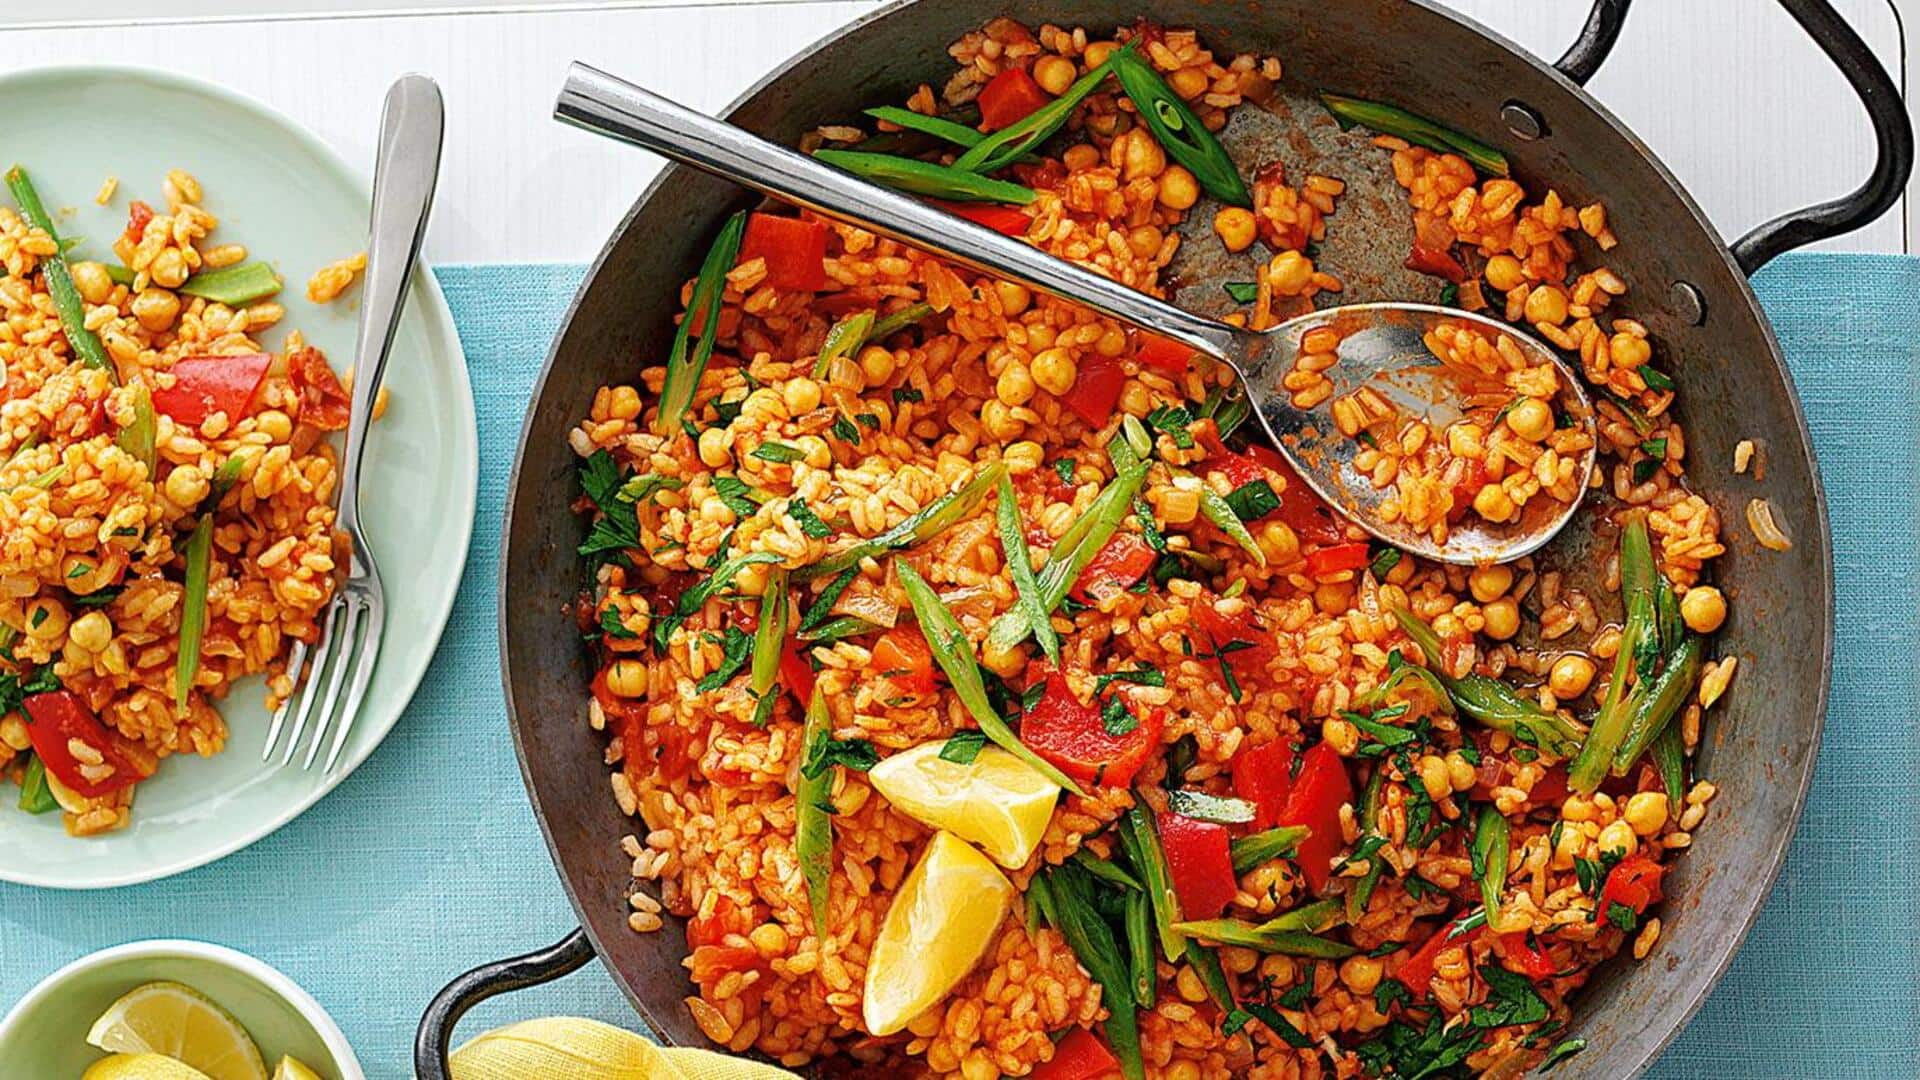 Vegan paella valenciana: A step-by-step cooking guide